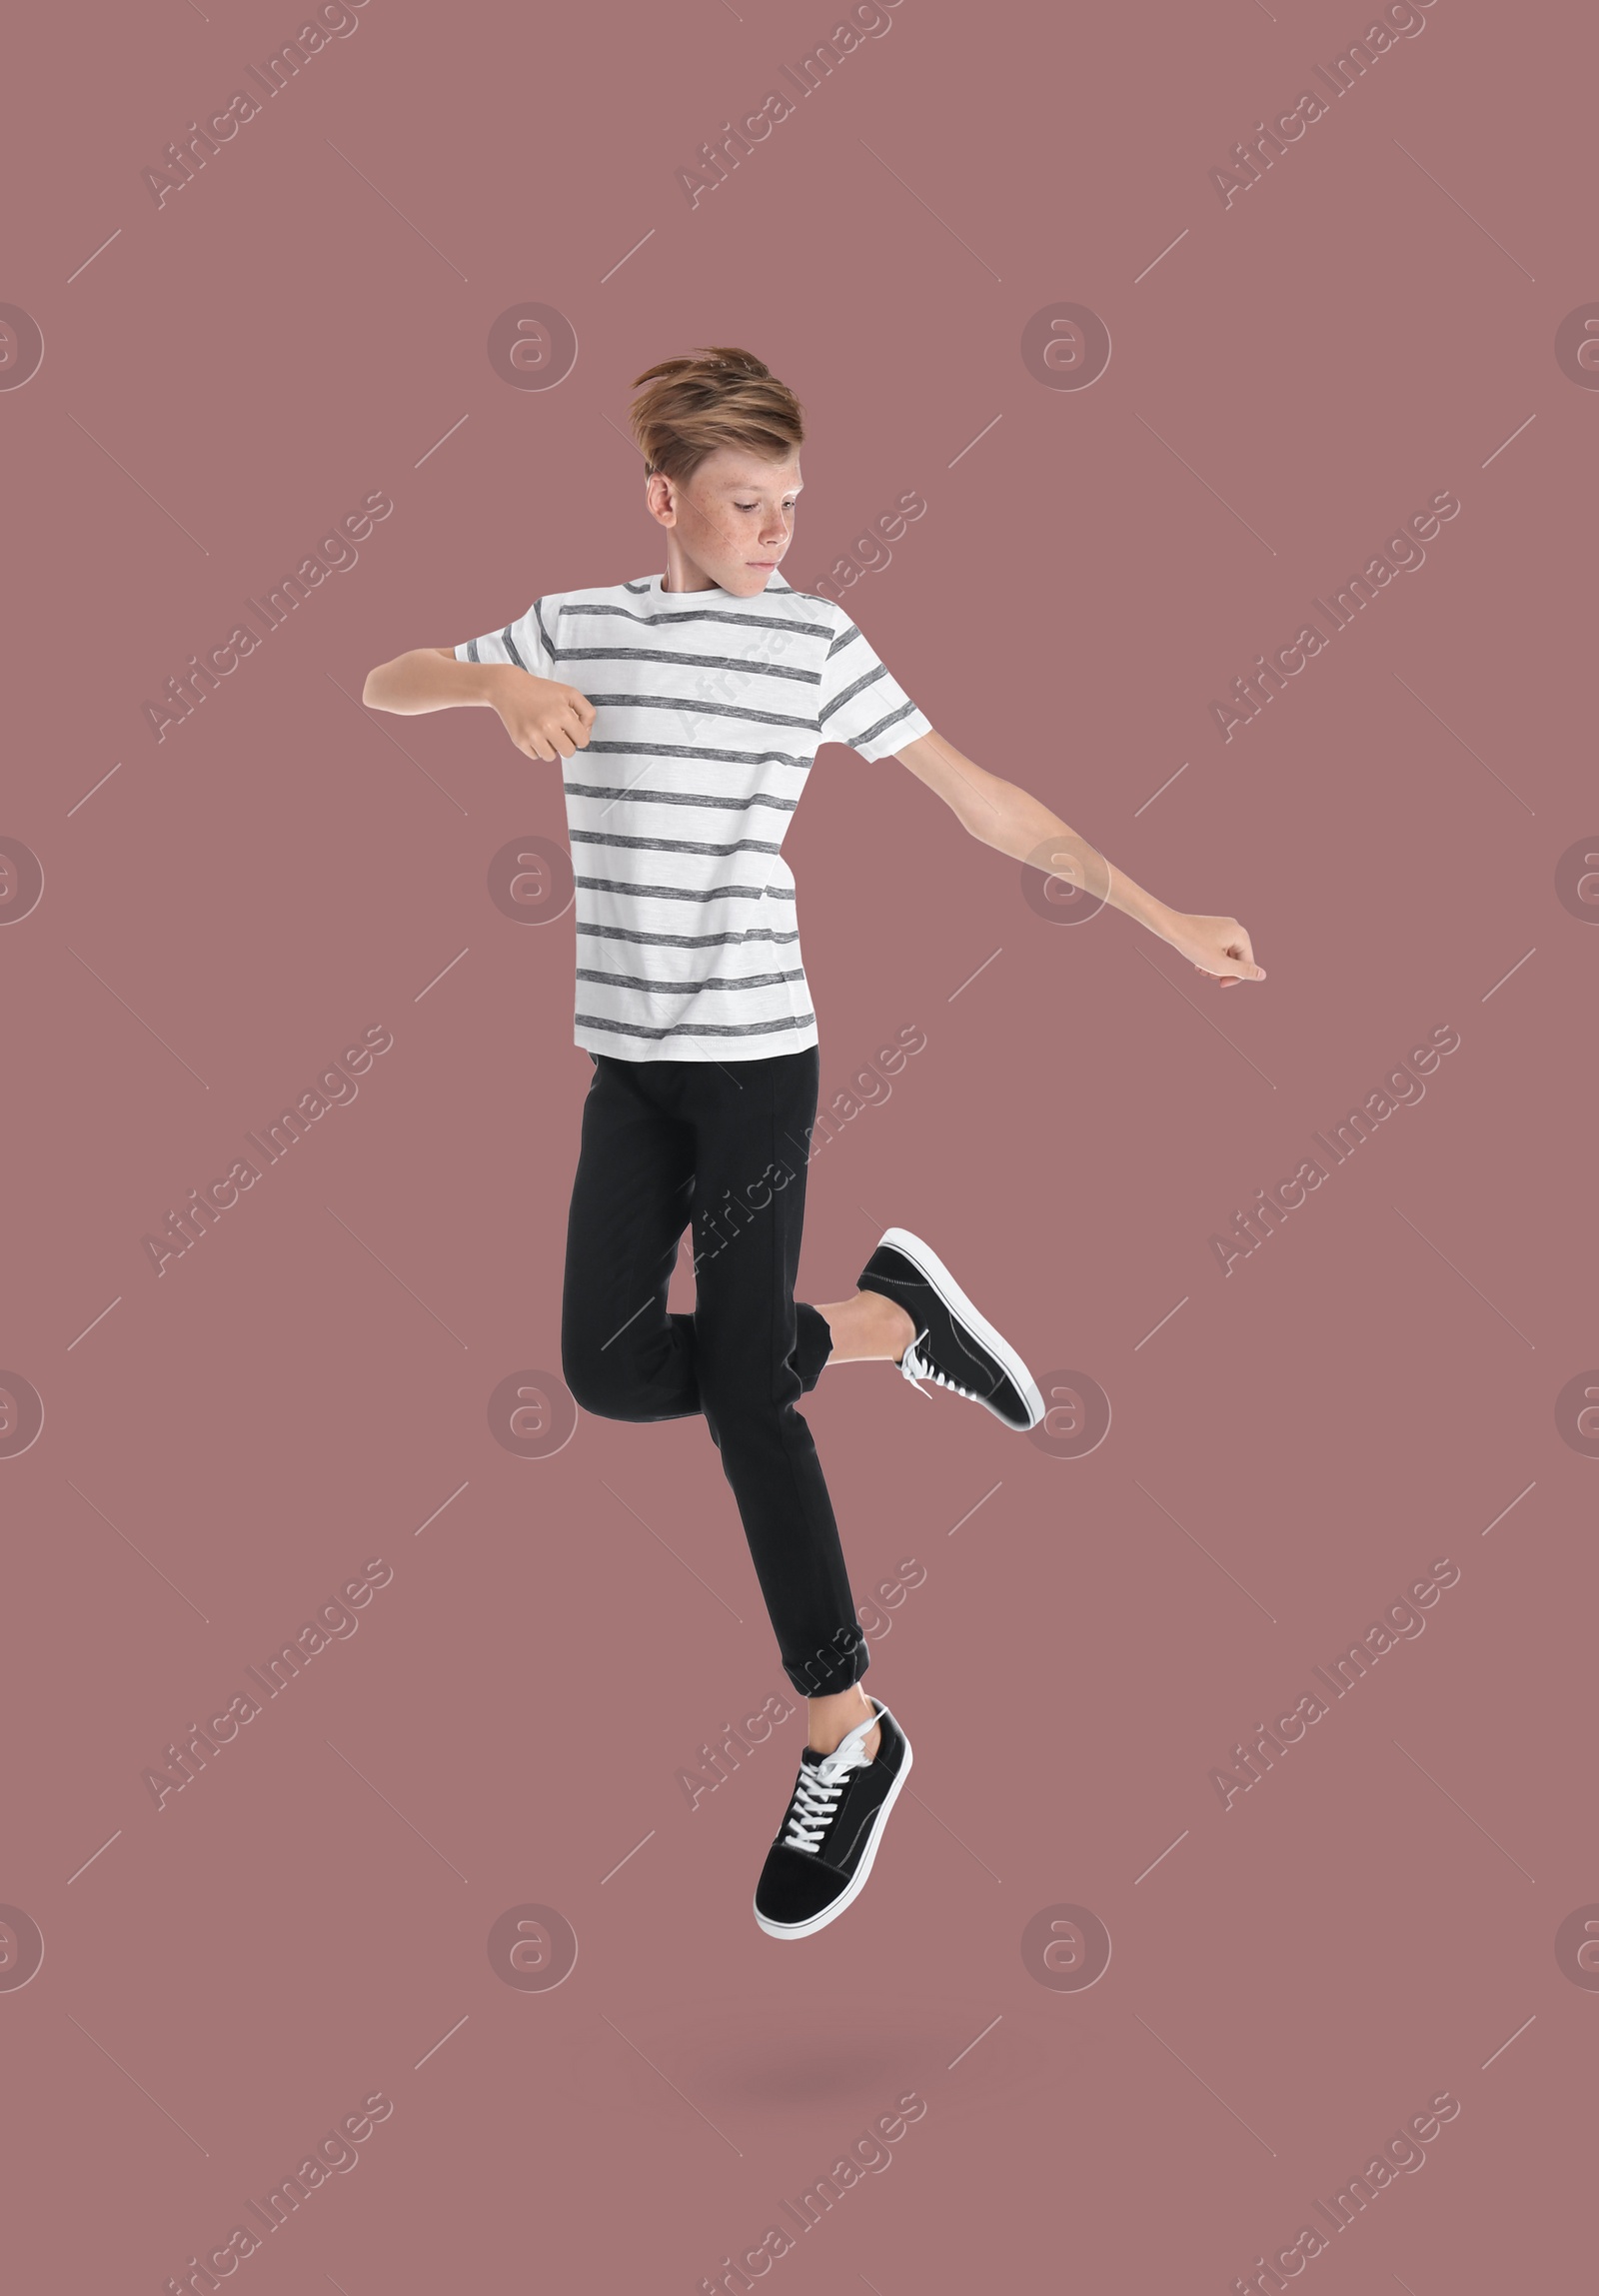 Image of Teenage boy jumping on dusty pink background, full length portrait